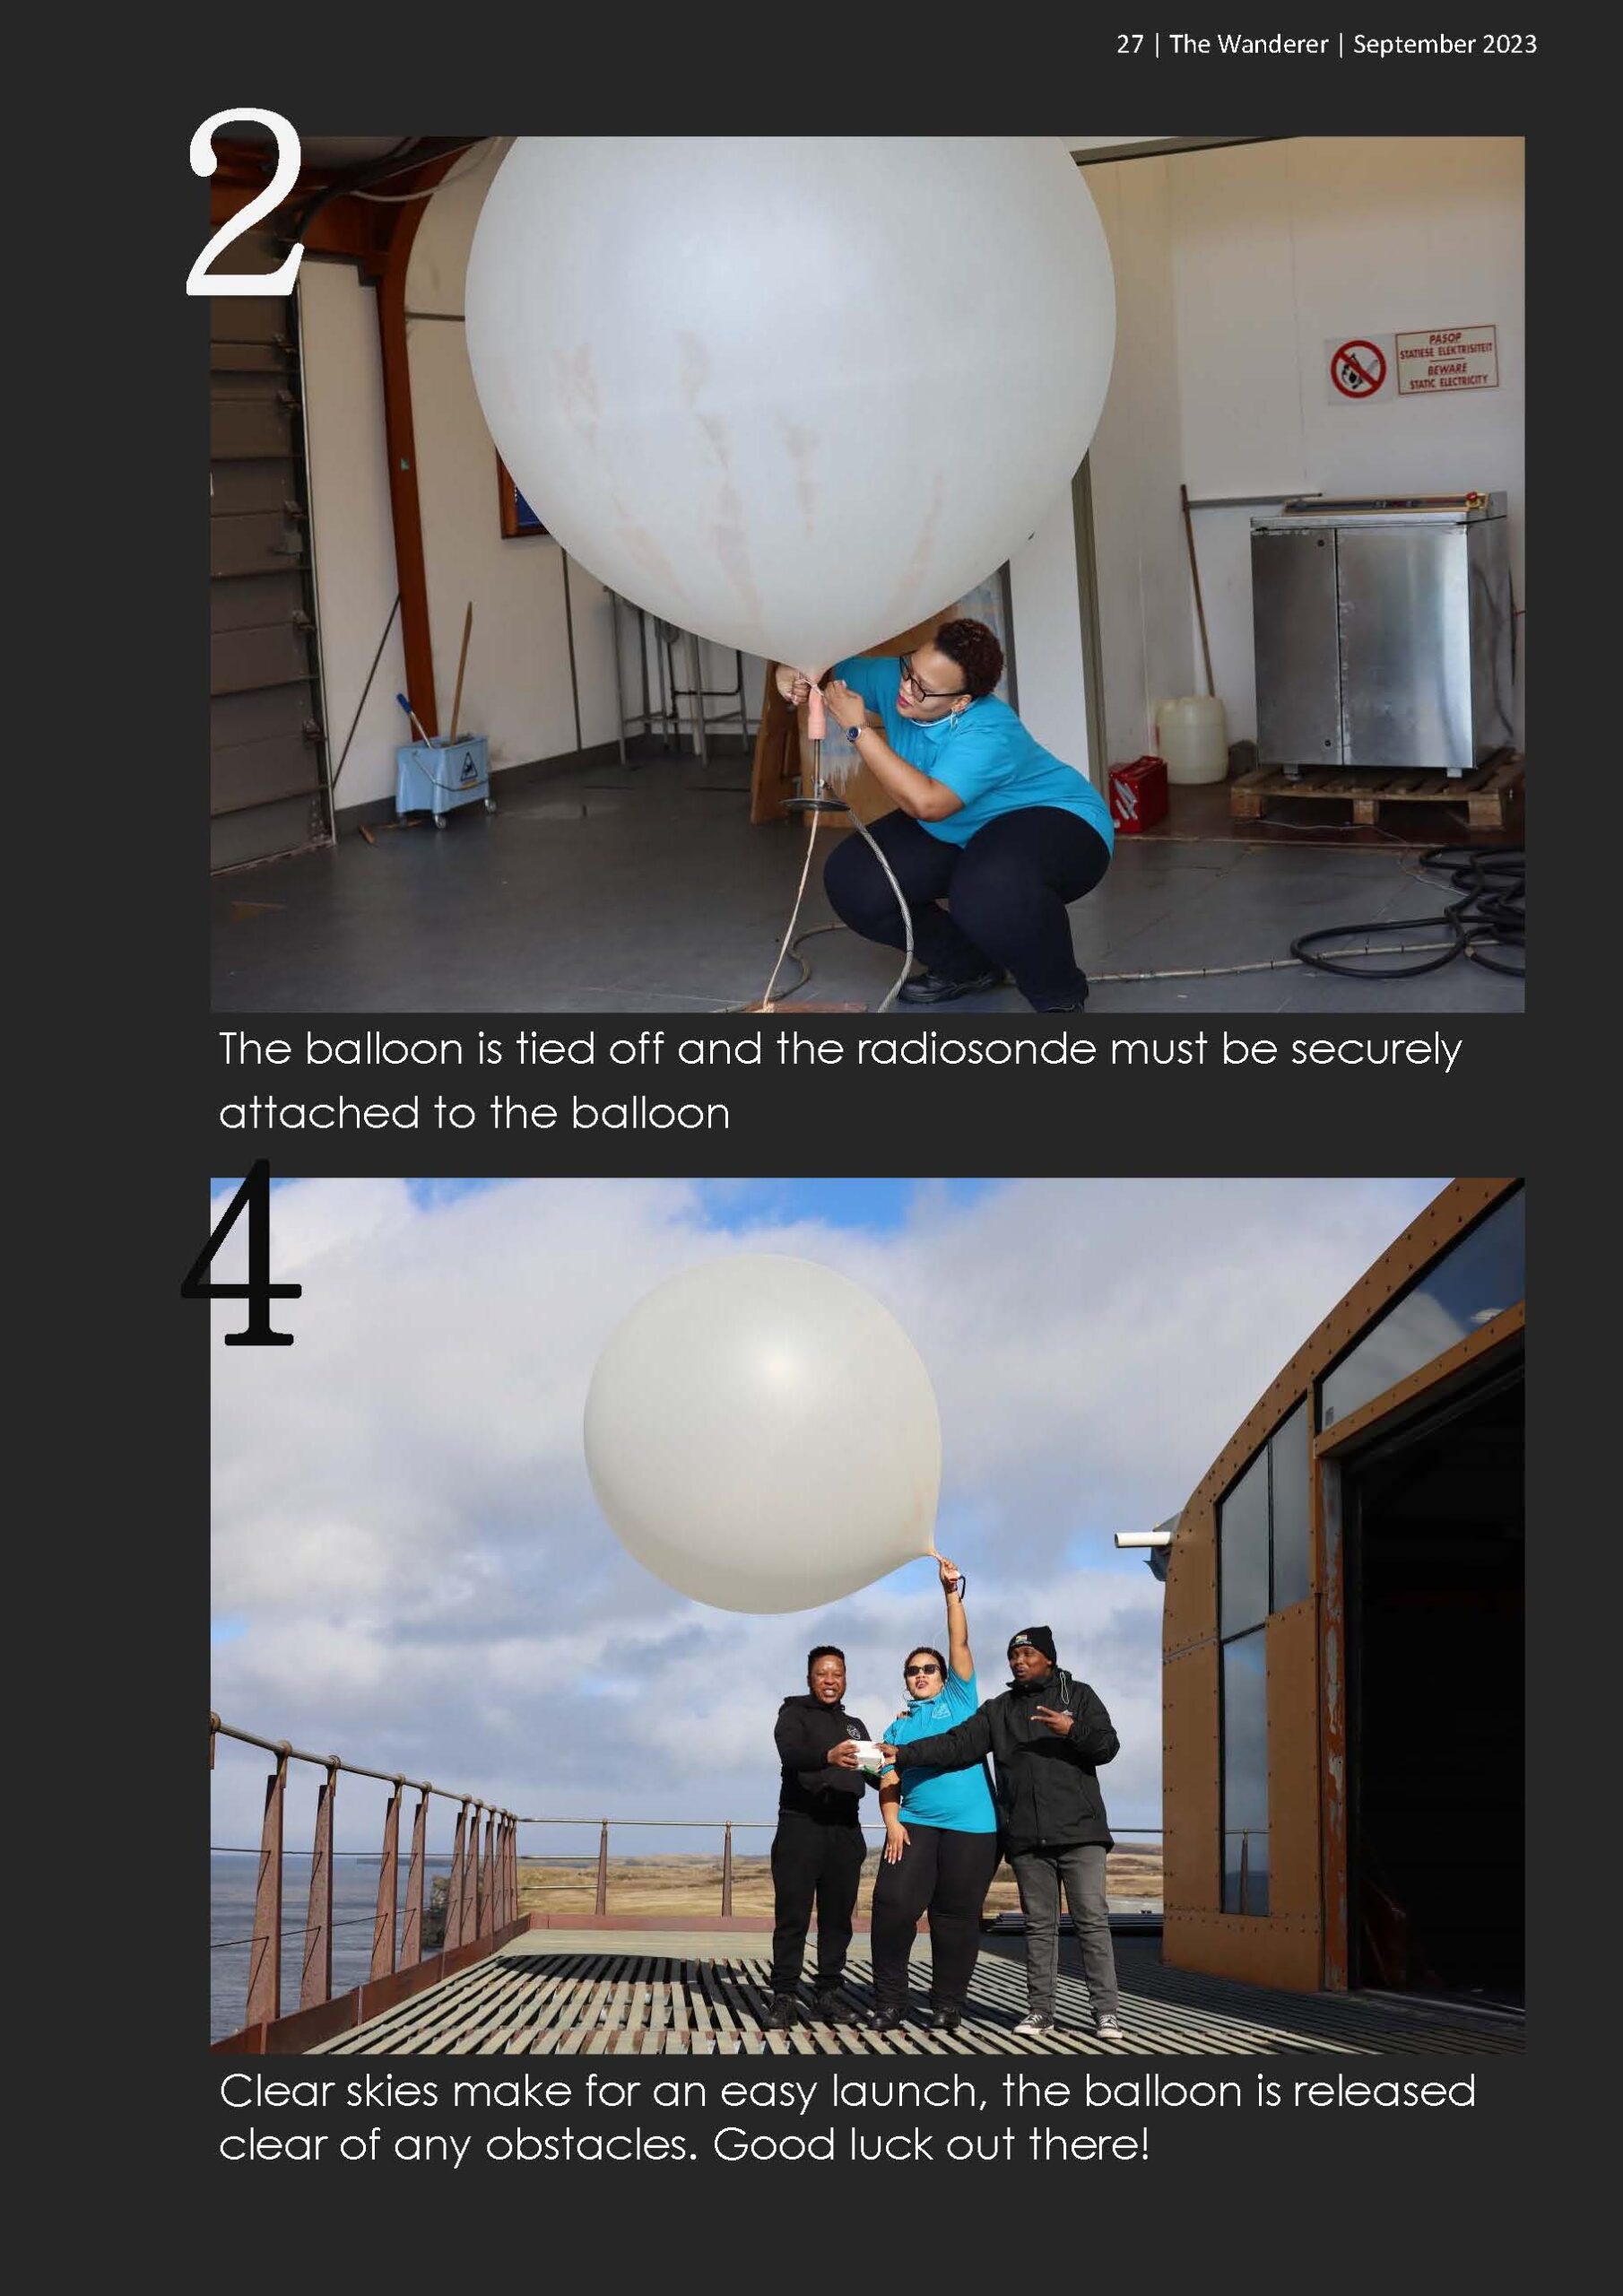 The_Wanderer_Spring Edition 2023_Balloon_Launching_Meteorology_SAWS_M80 (2)